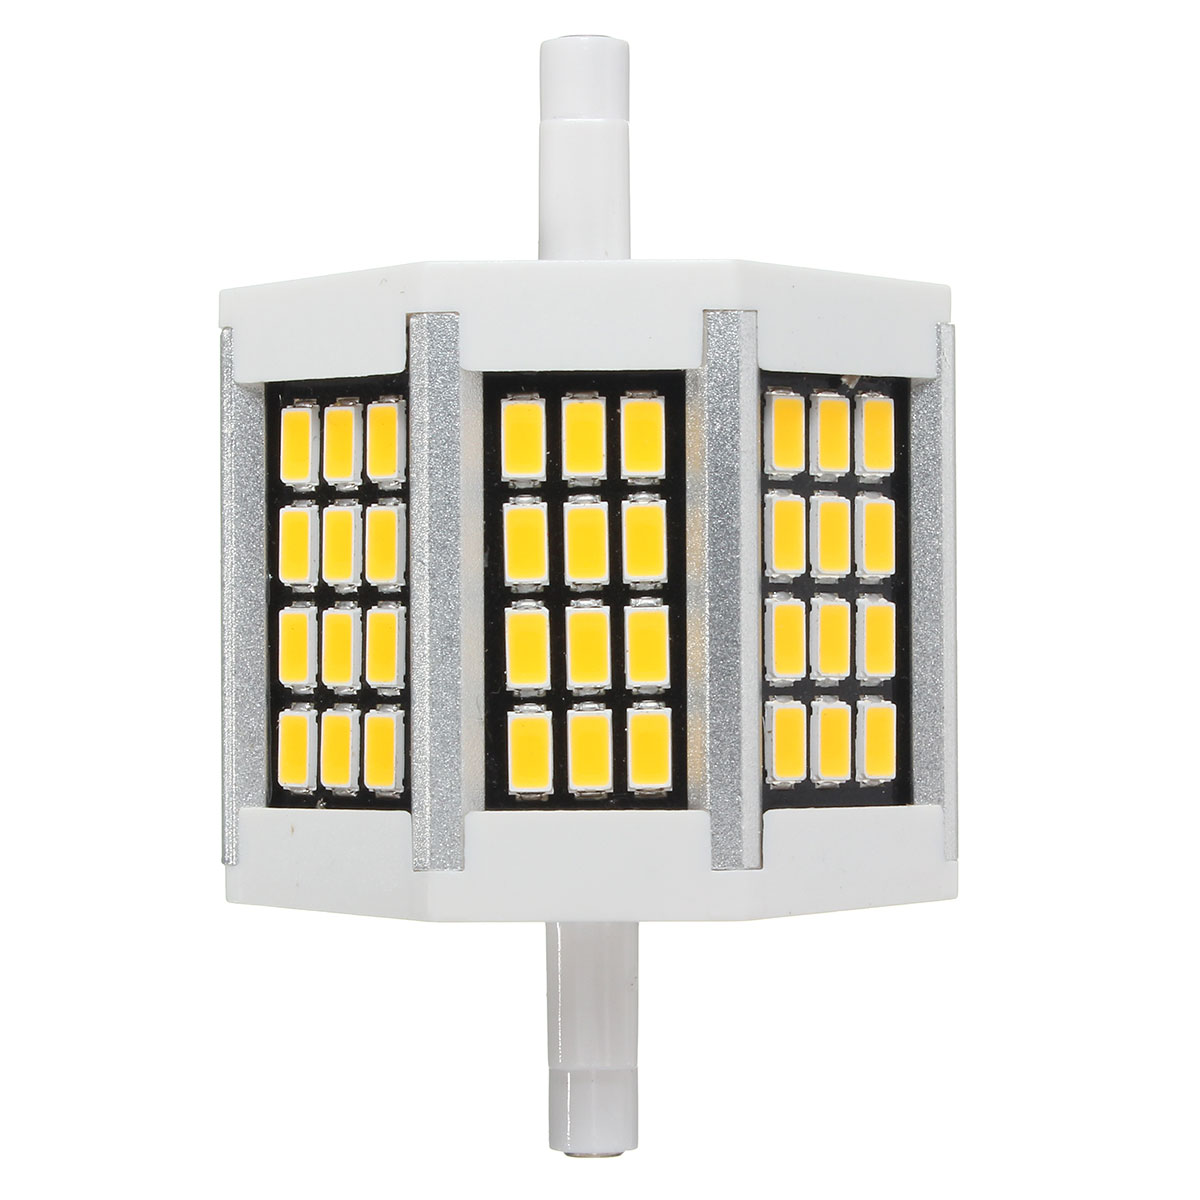 78MM-Non-dimmable-R7S-SMD5733-Warm-White-Pure-White-36-LED-Light-Bulb-AC110V-AC220V-1430529-5